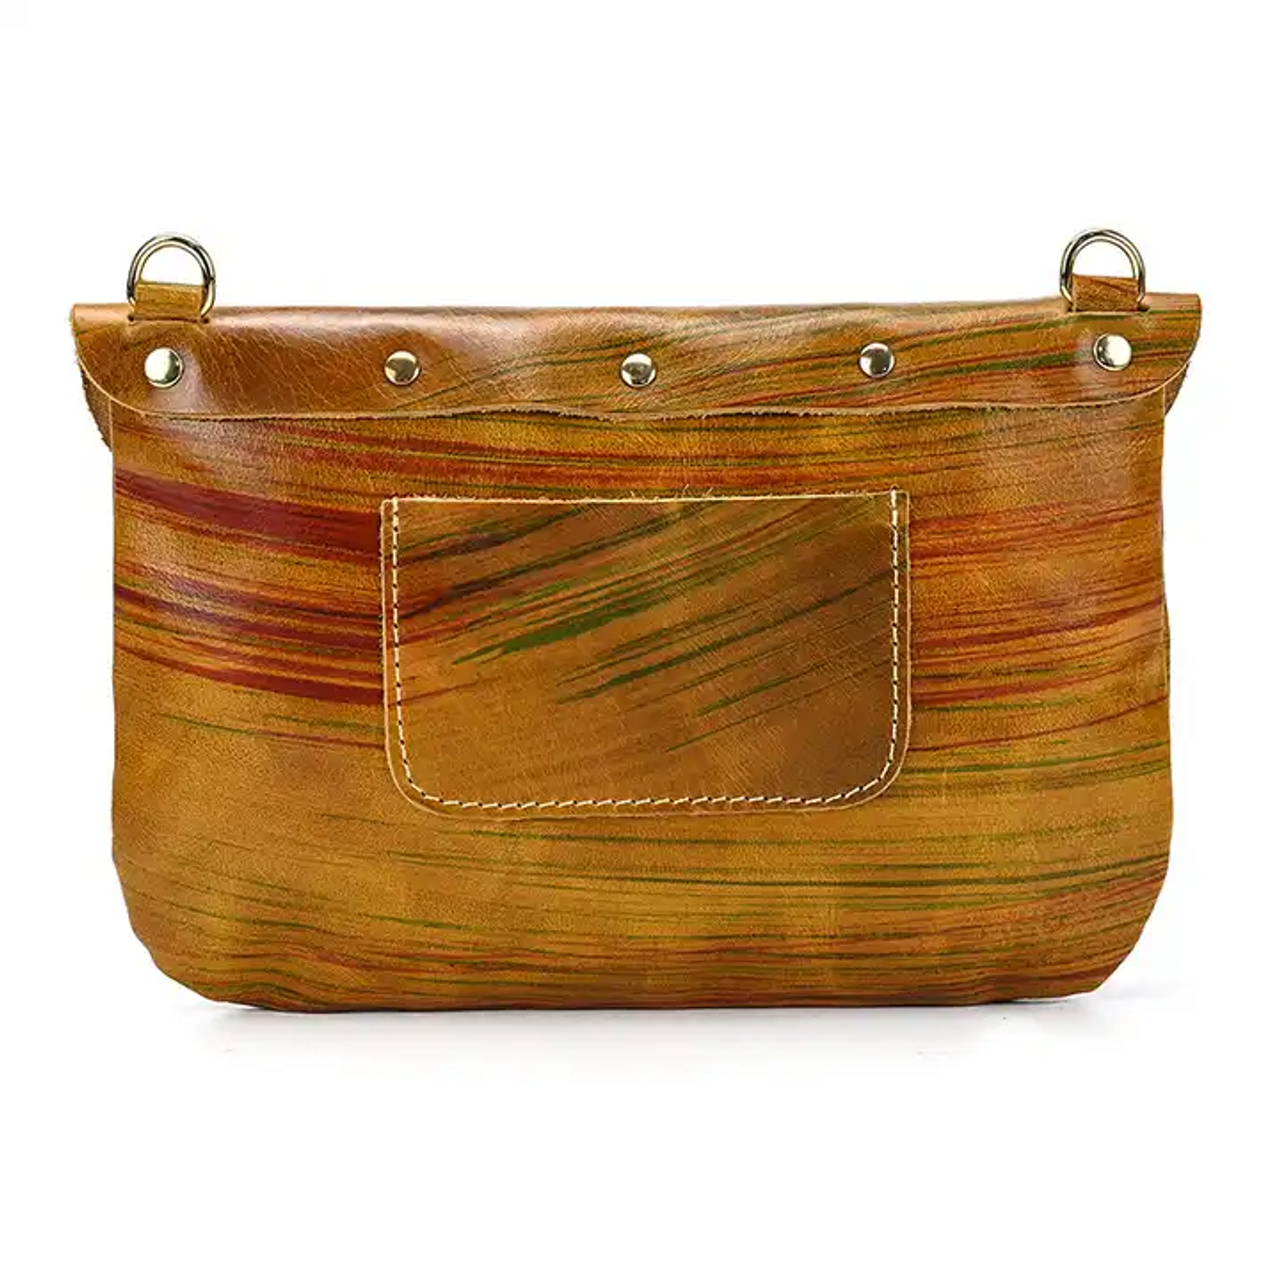 Colorful Small Leather Messenger Clutch